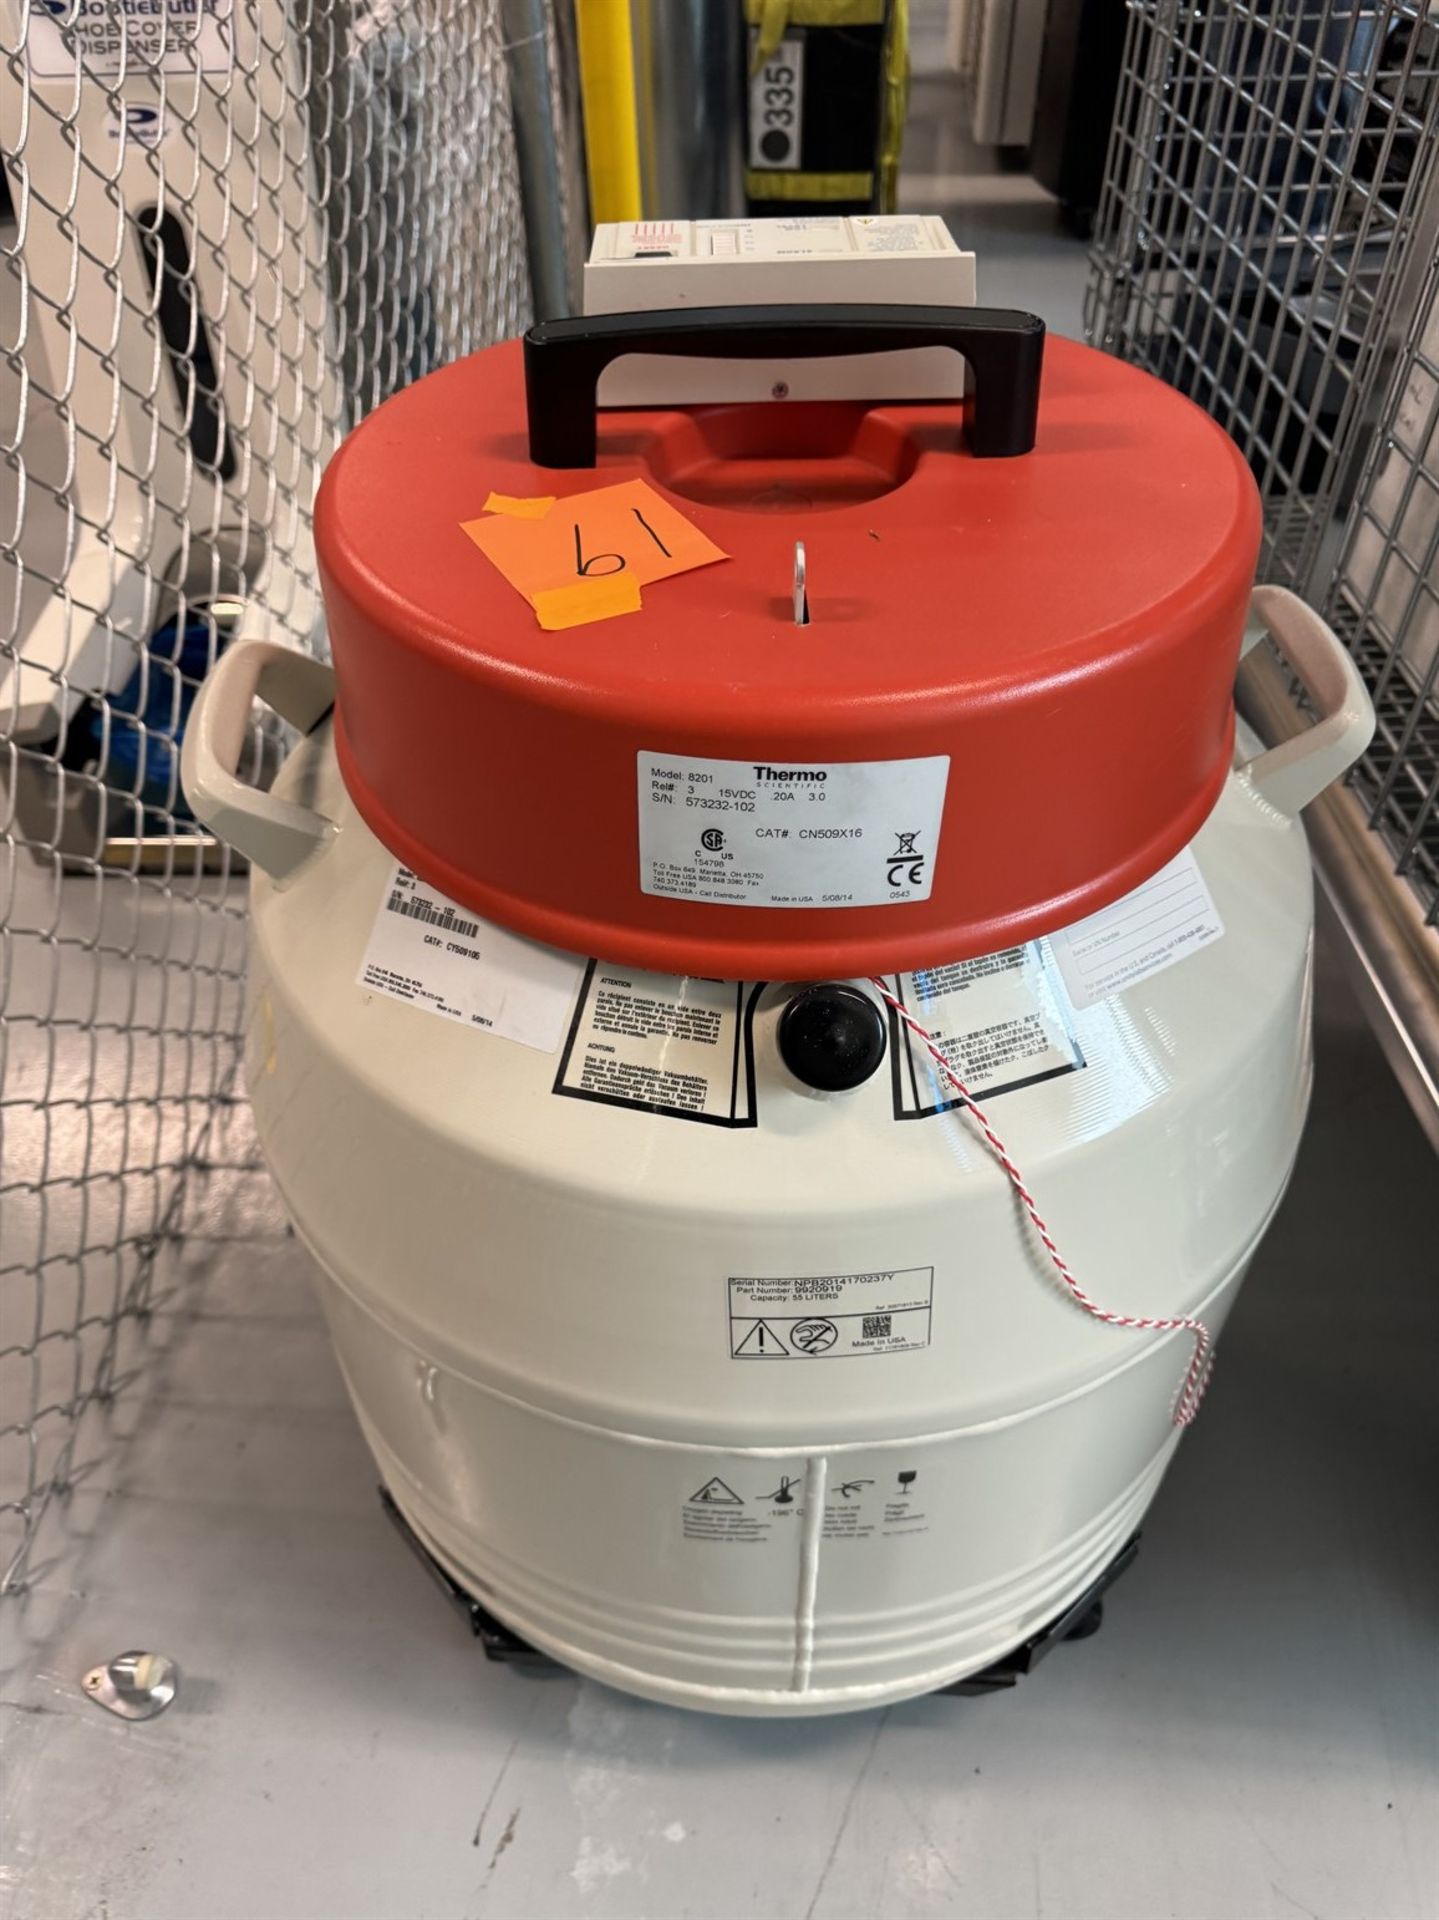 THERMO SCIENTIFIC 8201 Locator JR Cryopreservation Tank, s/n 573232-102 - Image 7 of 7